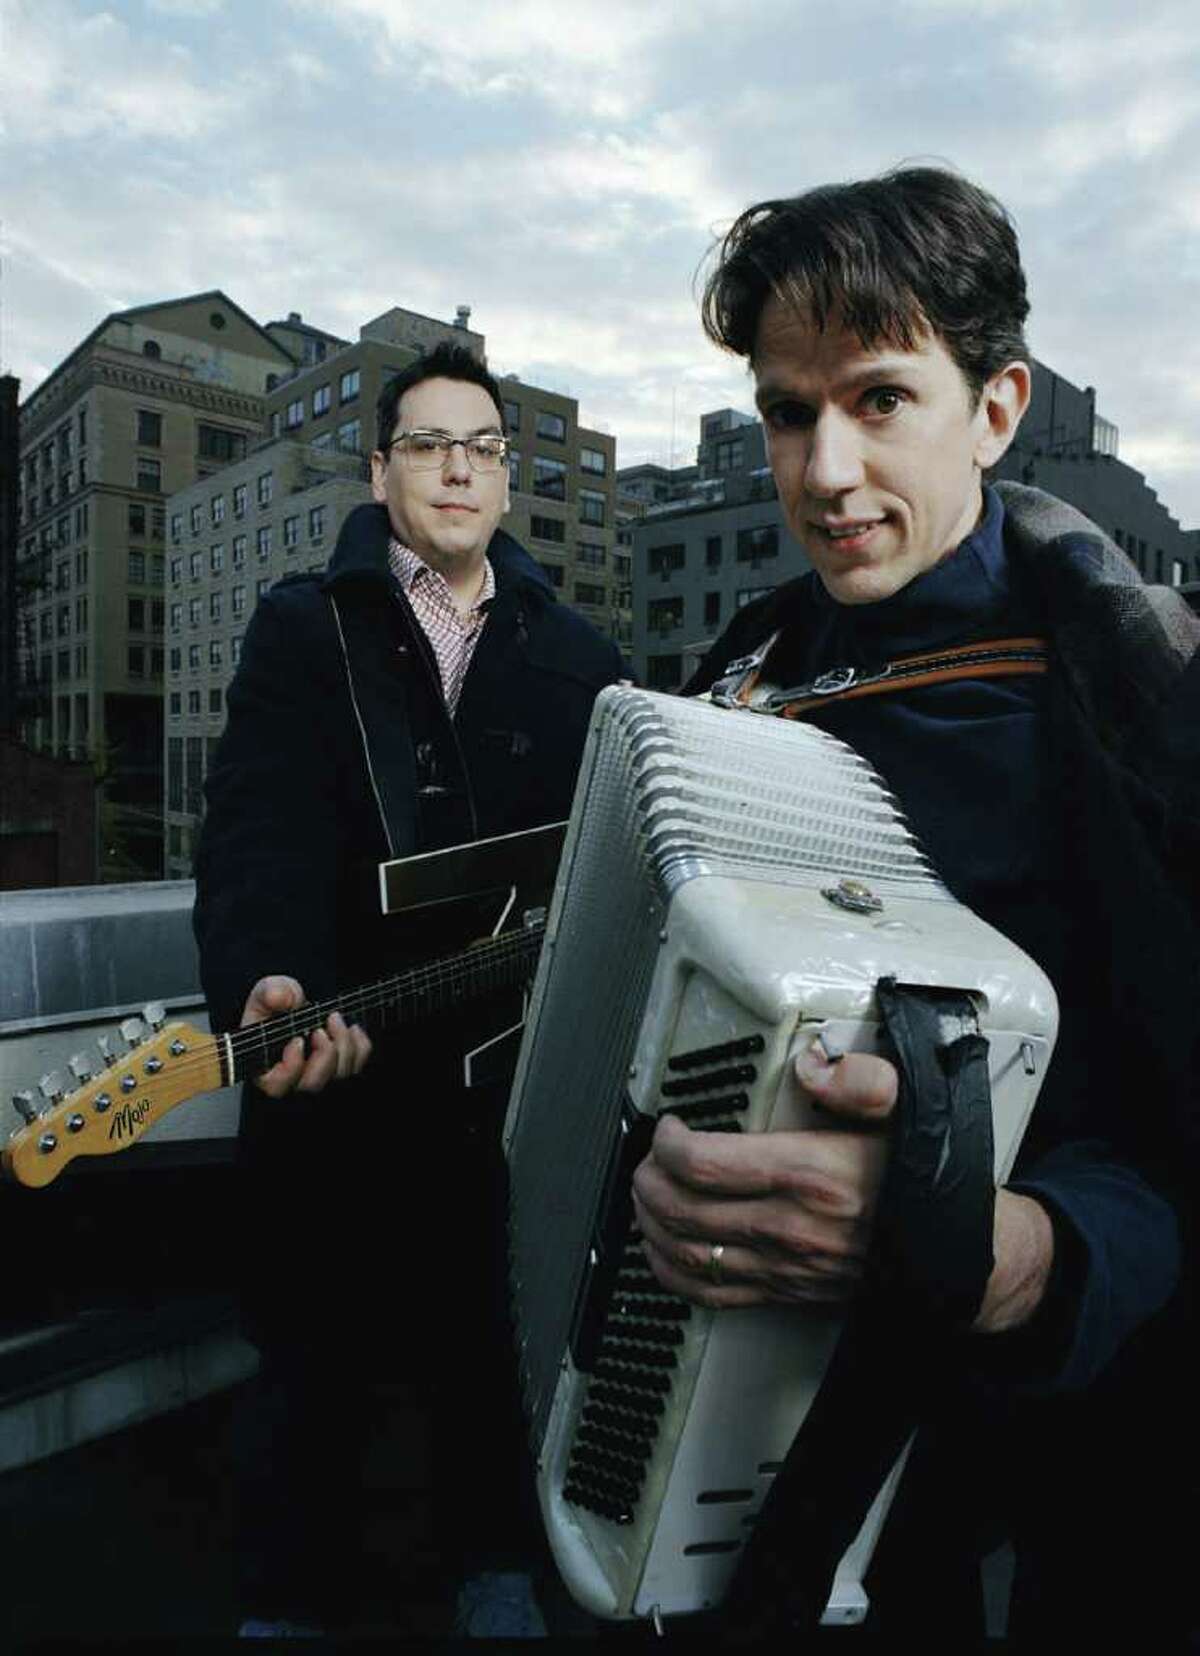 They Might Be Giants will be at the Quick Center at Fairfield University for two shows Saturday, Oct. 30, including a family show at 4 p.m.